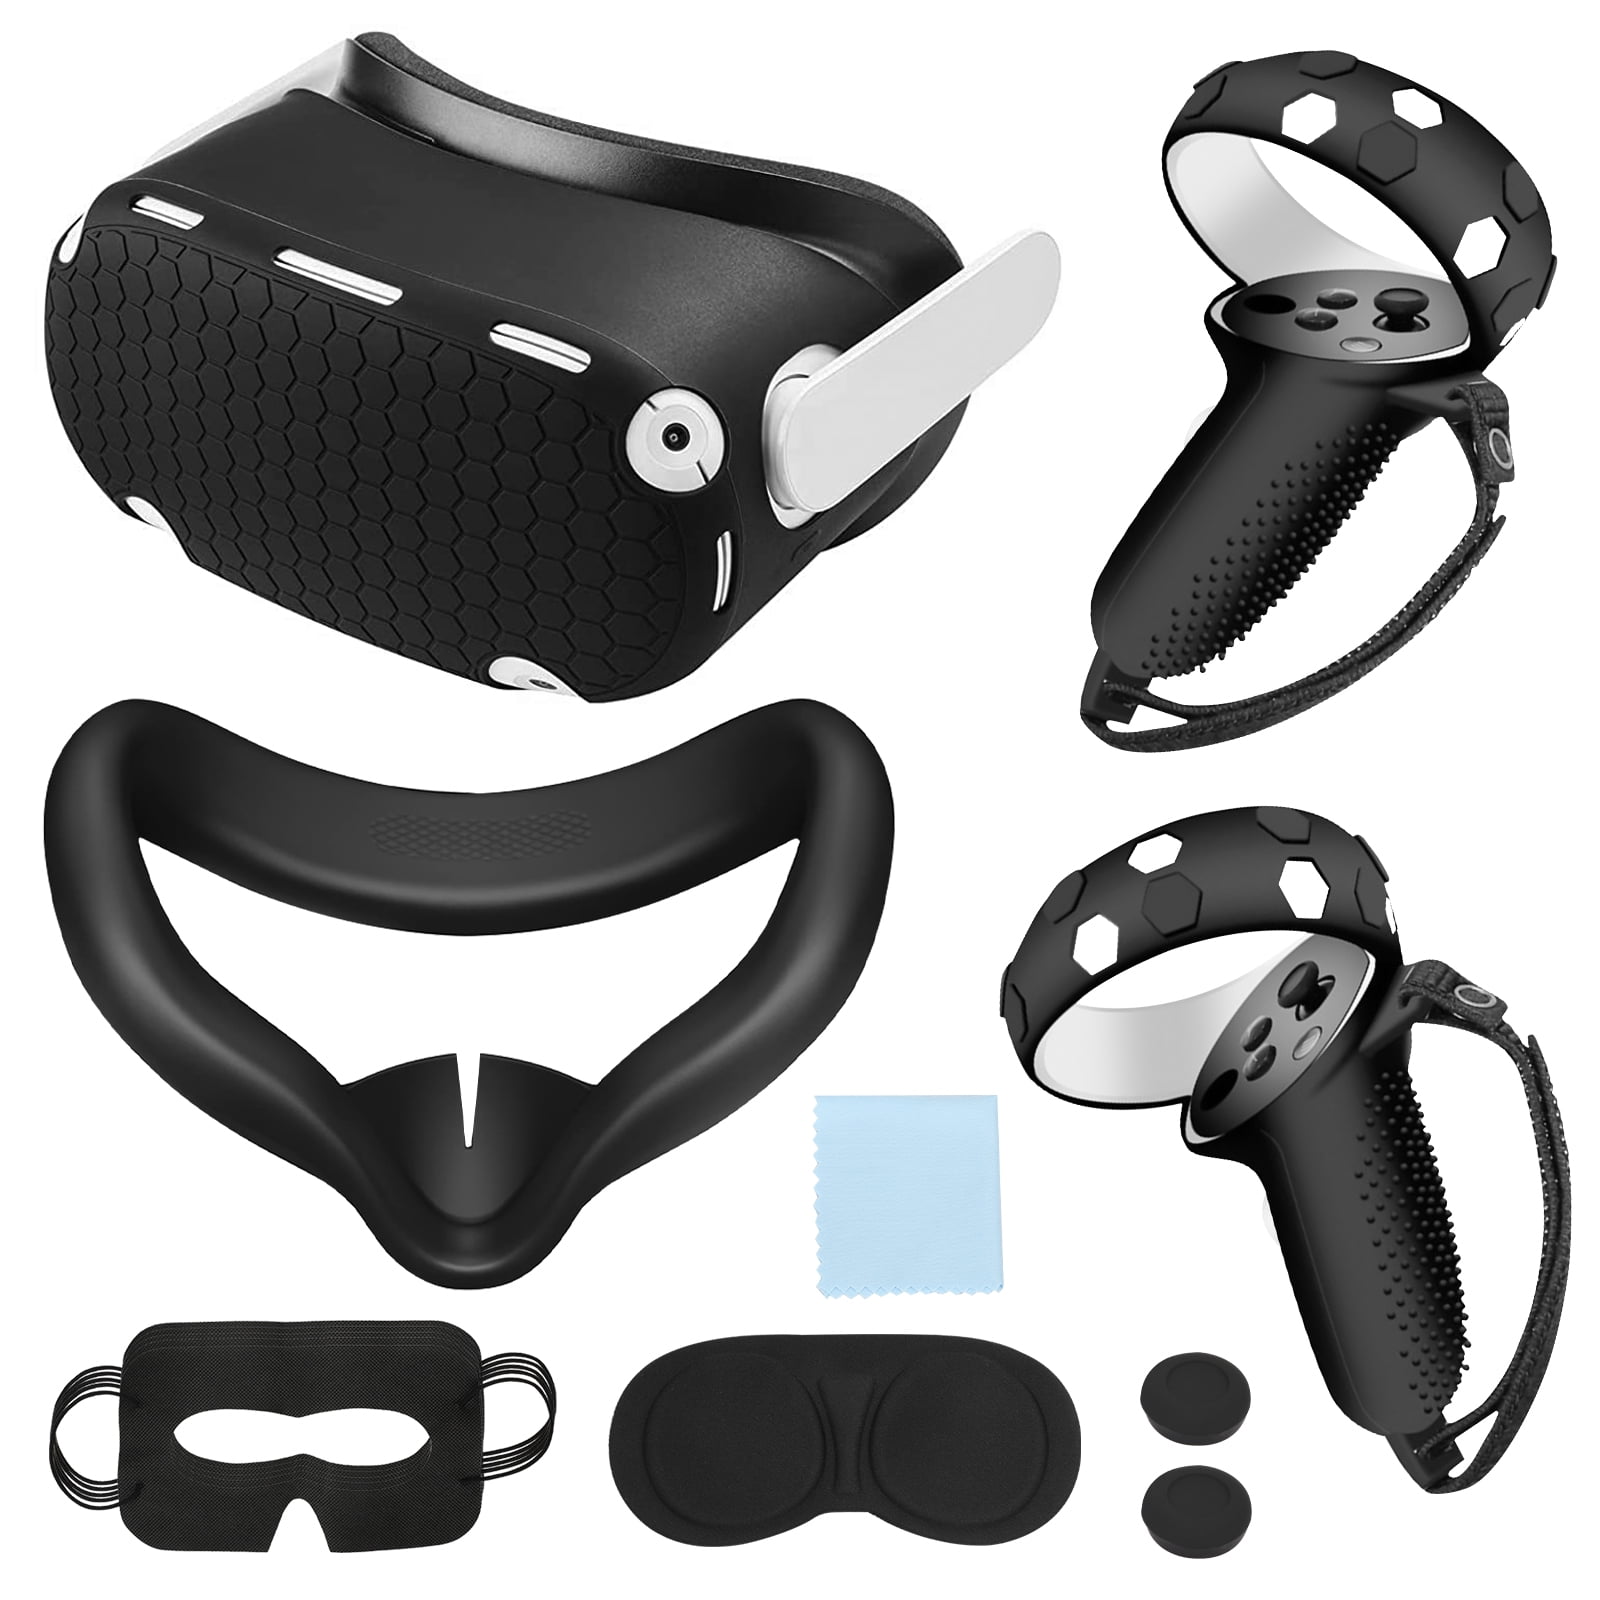 10-in-1 VR Accessories Set Fit for Oculus Quest 2, EEEkit Touch Controller Grip Cover Fit for Oculus Quest 2 with VR Silicone Face Cover, VR Shell Cover, Protective Lens Disposable Eye